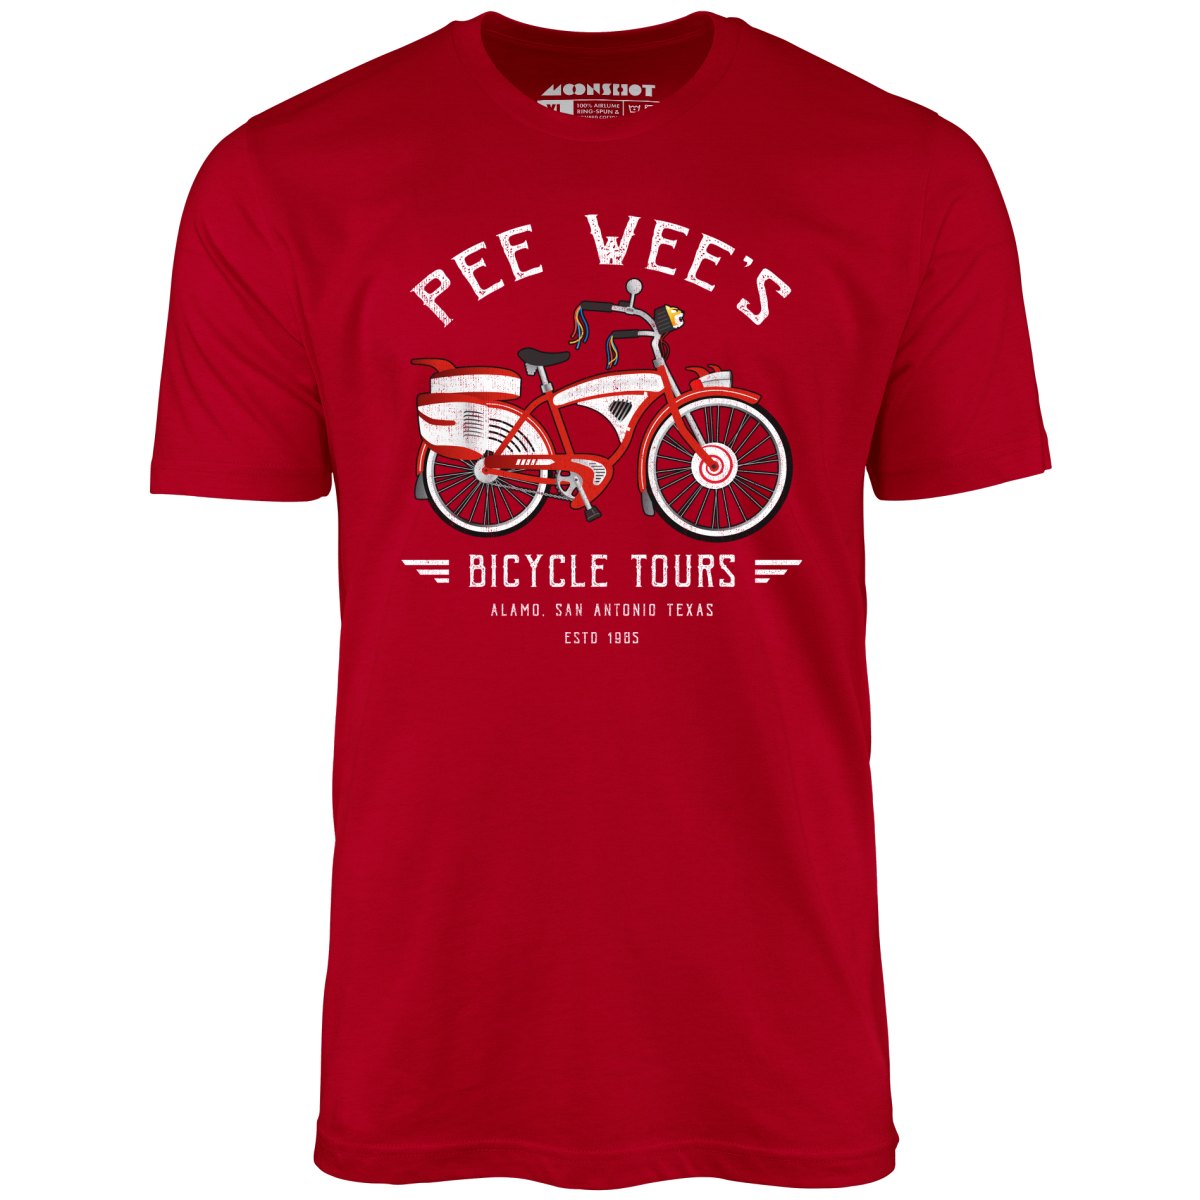 Pee Wee's Bicycle Tours - Unisex T-Shirt